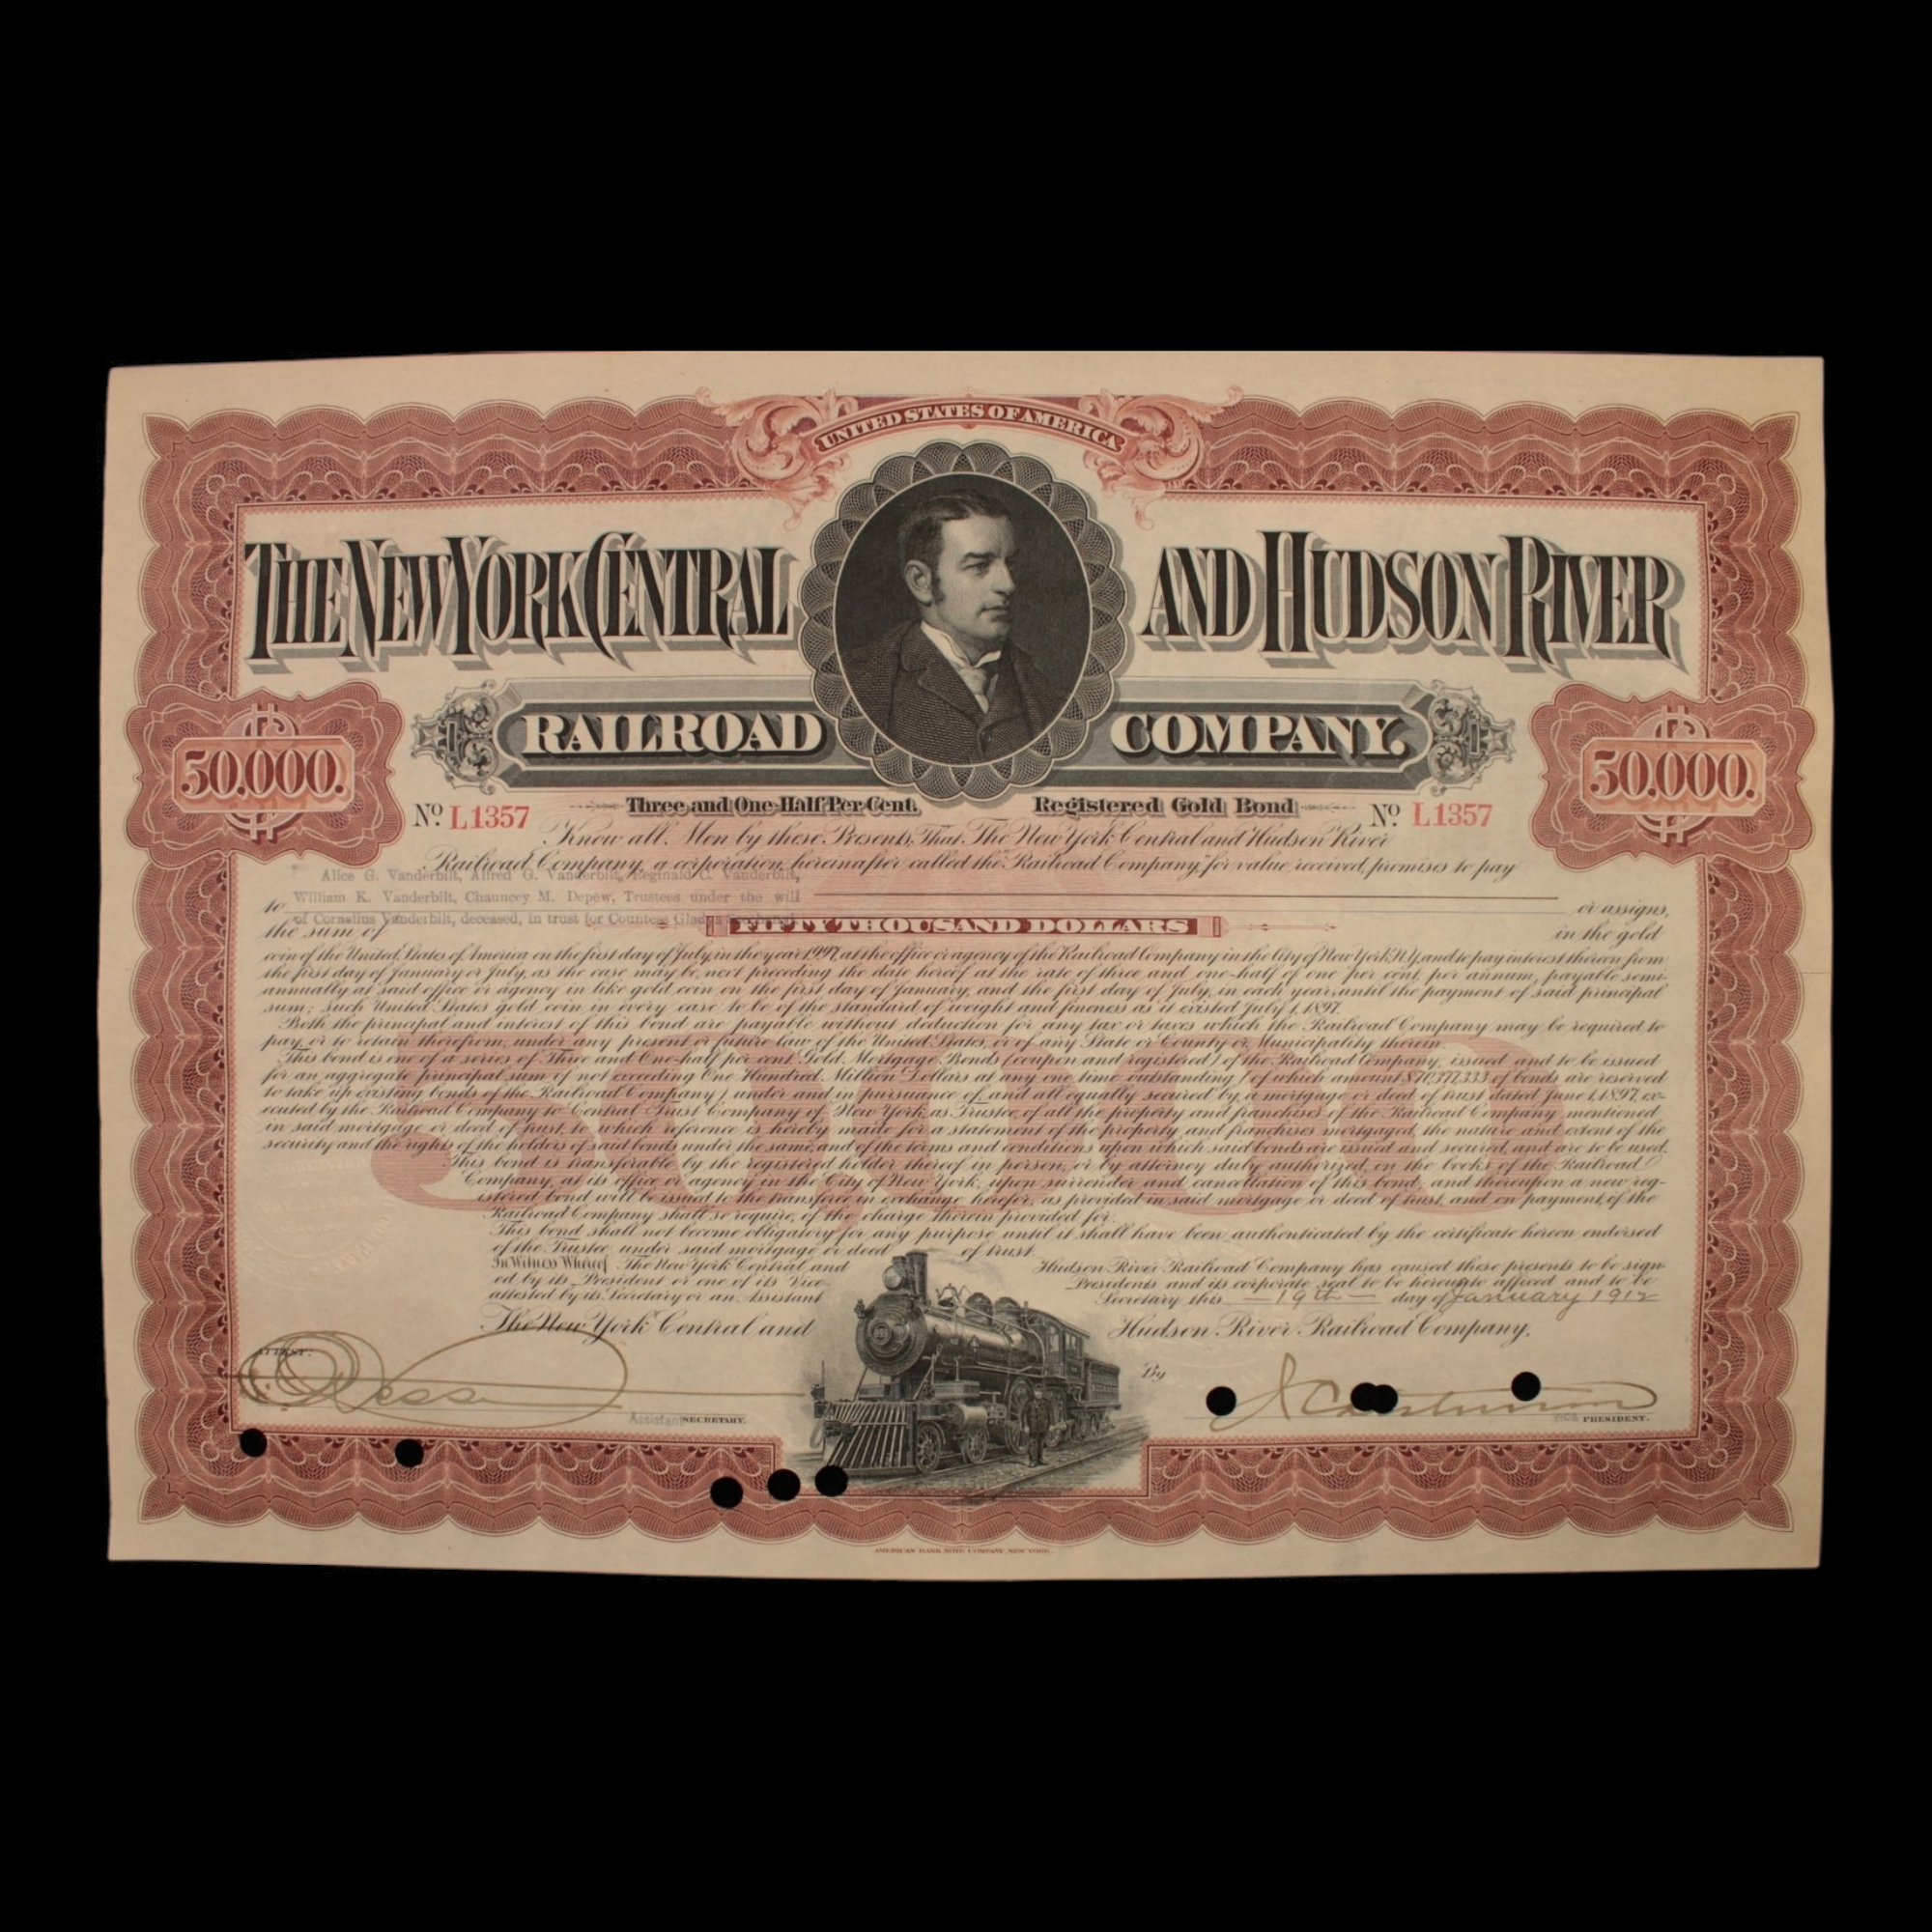 NY Central & Hudson River Railroad Stock Certificate - 1912 - Issued to Vanderbilt Family